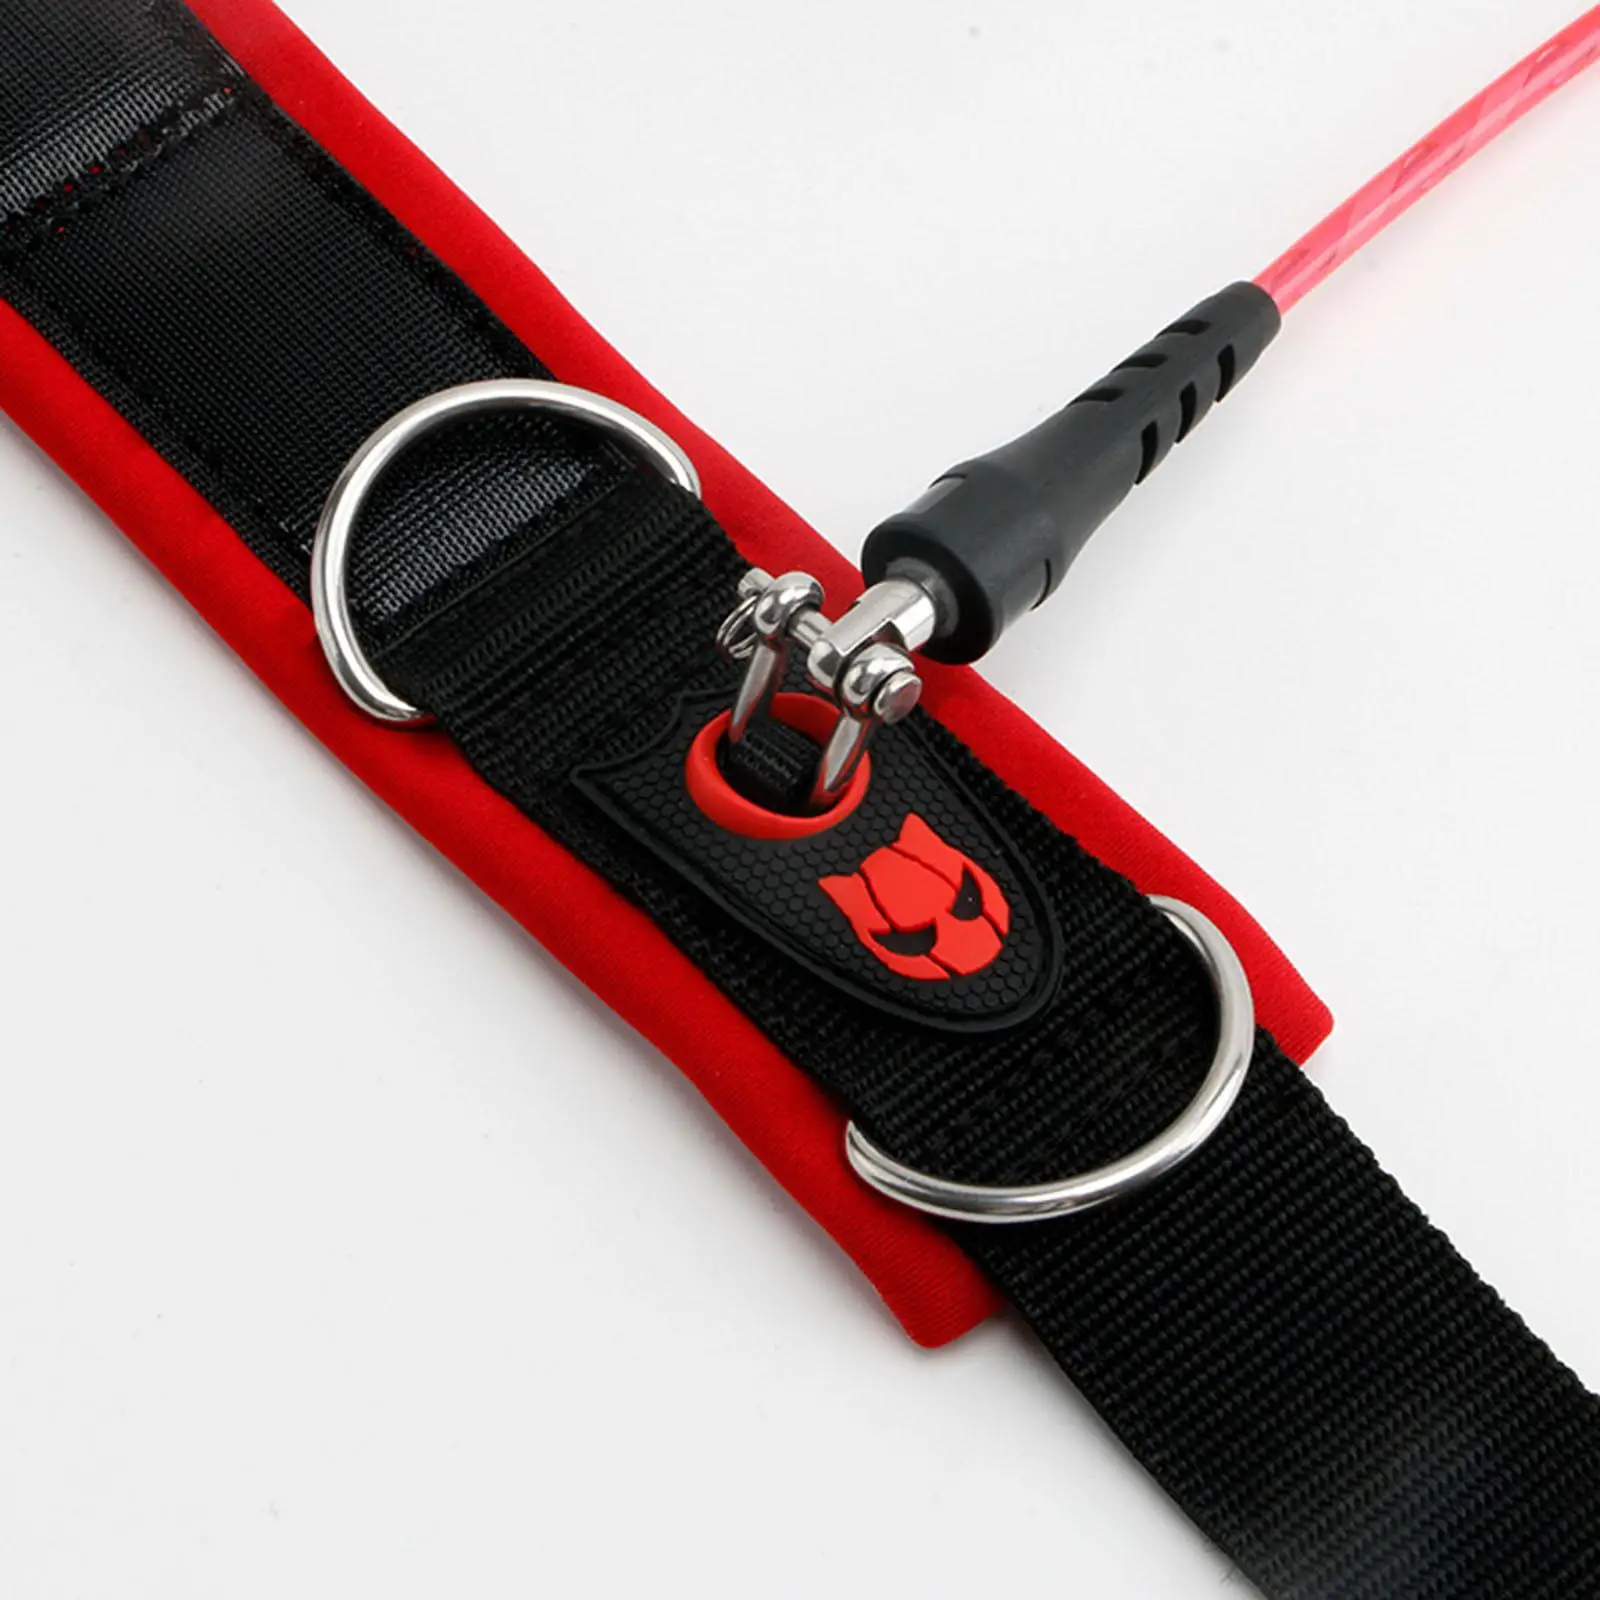 Freediving Diving Lanyard Stainless Steel Rope with Carabiner Swivel Snap Loose Anti-lost Safety Cable Security Leash